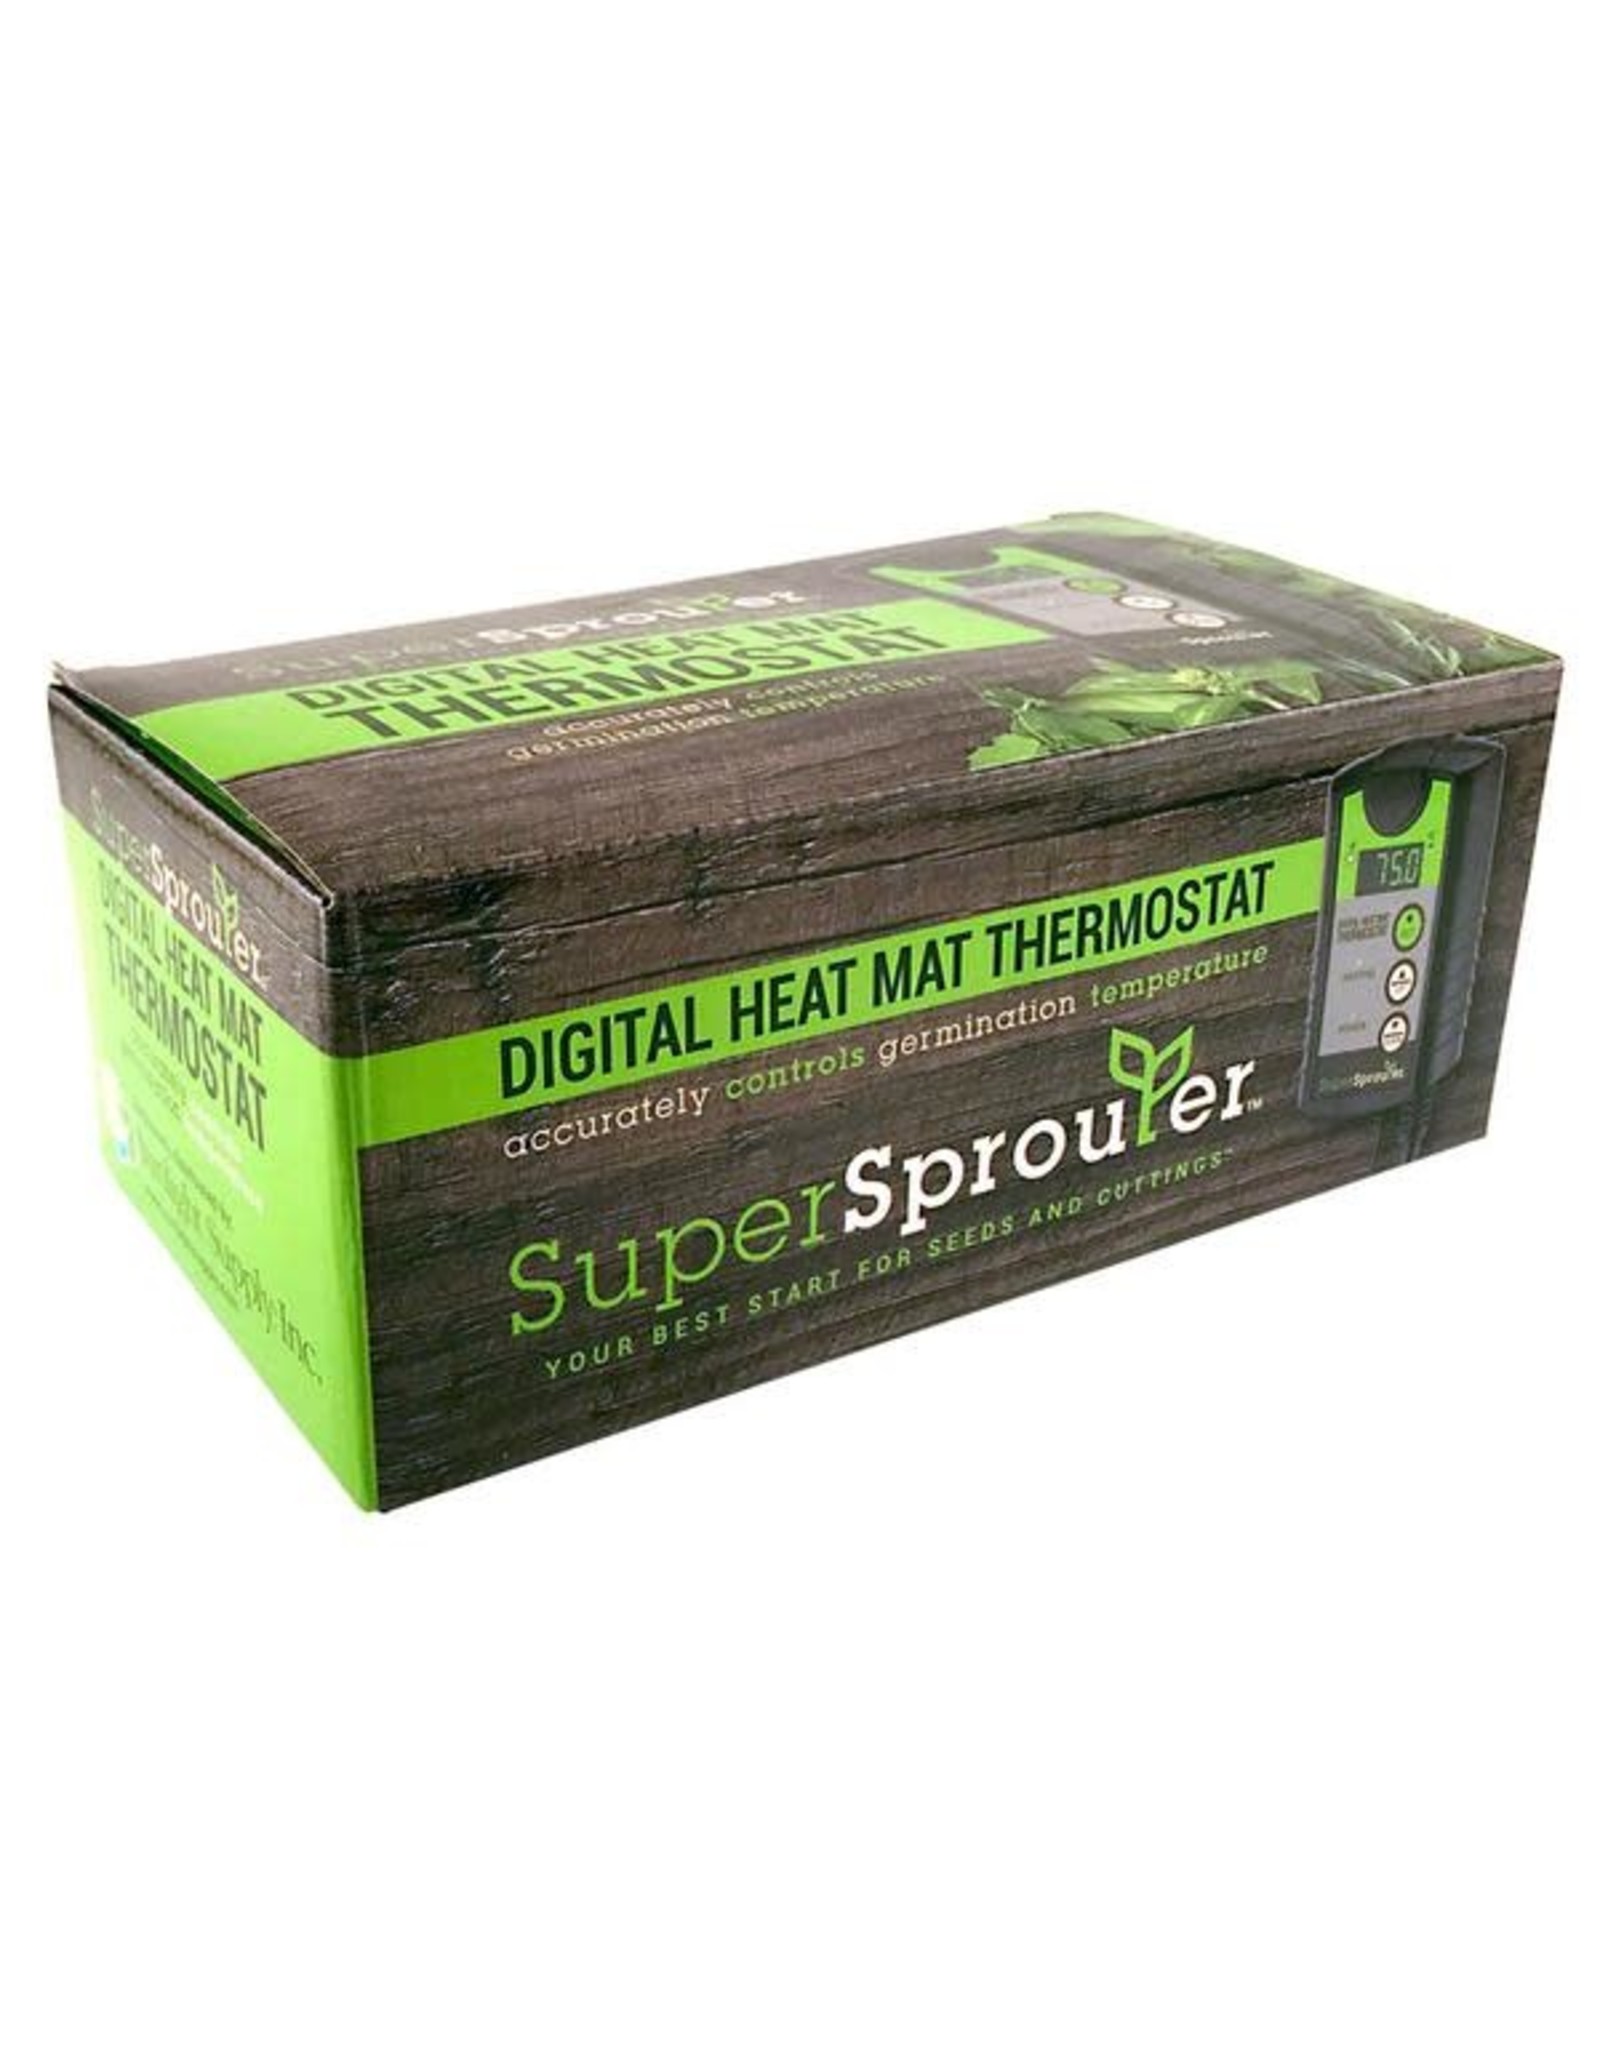 Super Sprouter Super Sprouter Digital Heat Mat Thermostat